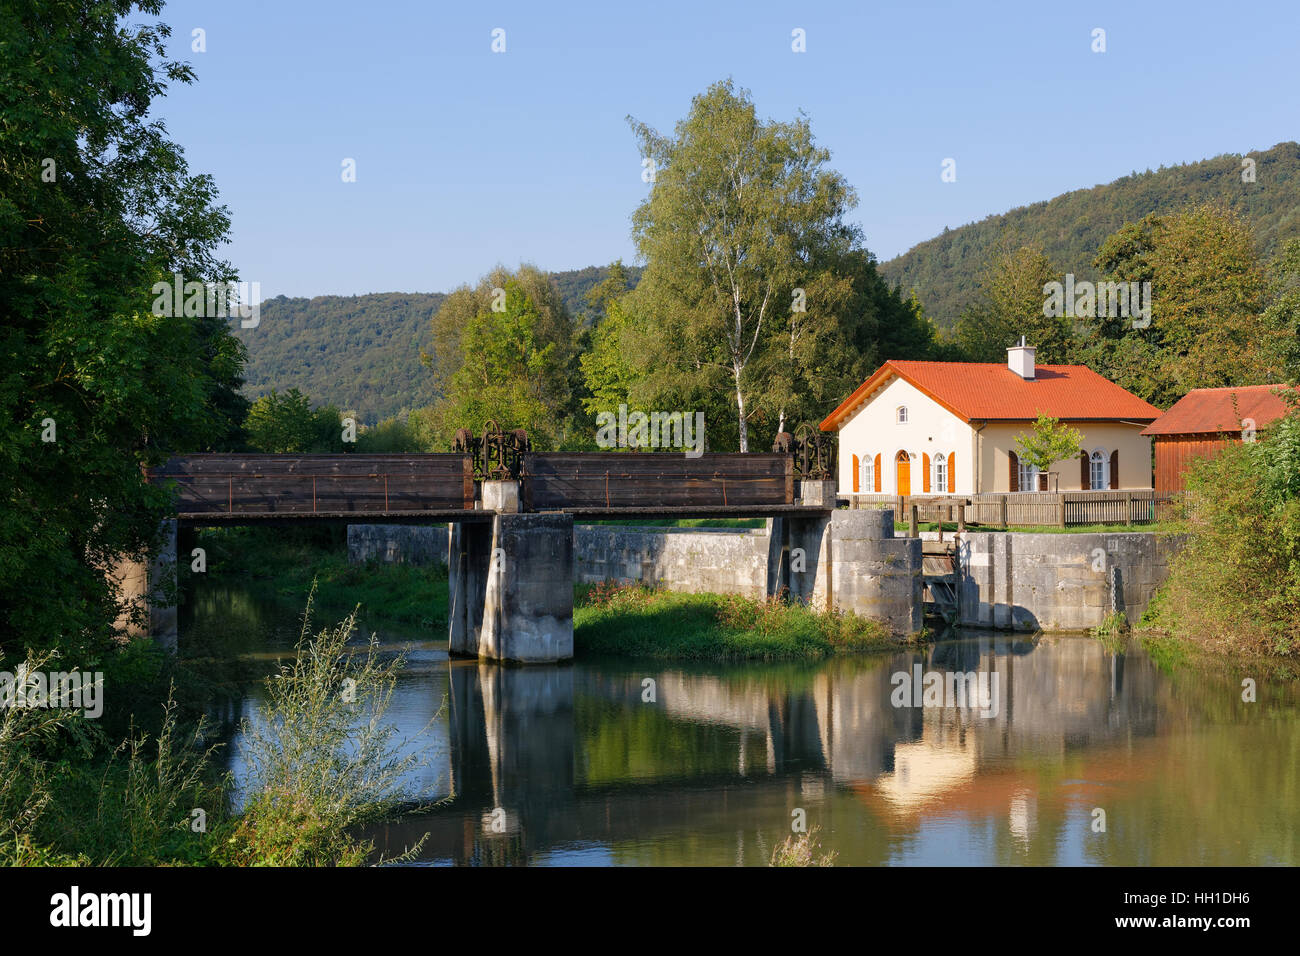 Gatekeeper's house and Lock 11 at Ludwig Canal, Deising in Riedenburg, Altmühltal, The Altmühl Valley, Lower Bavaria Stock Photo